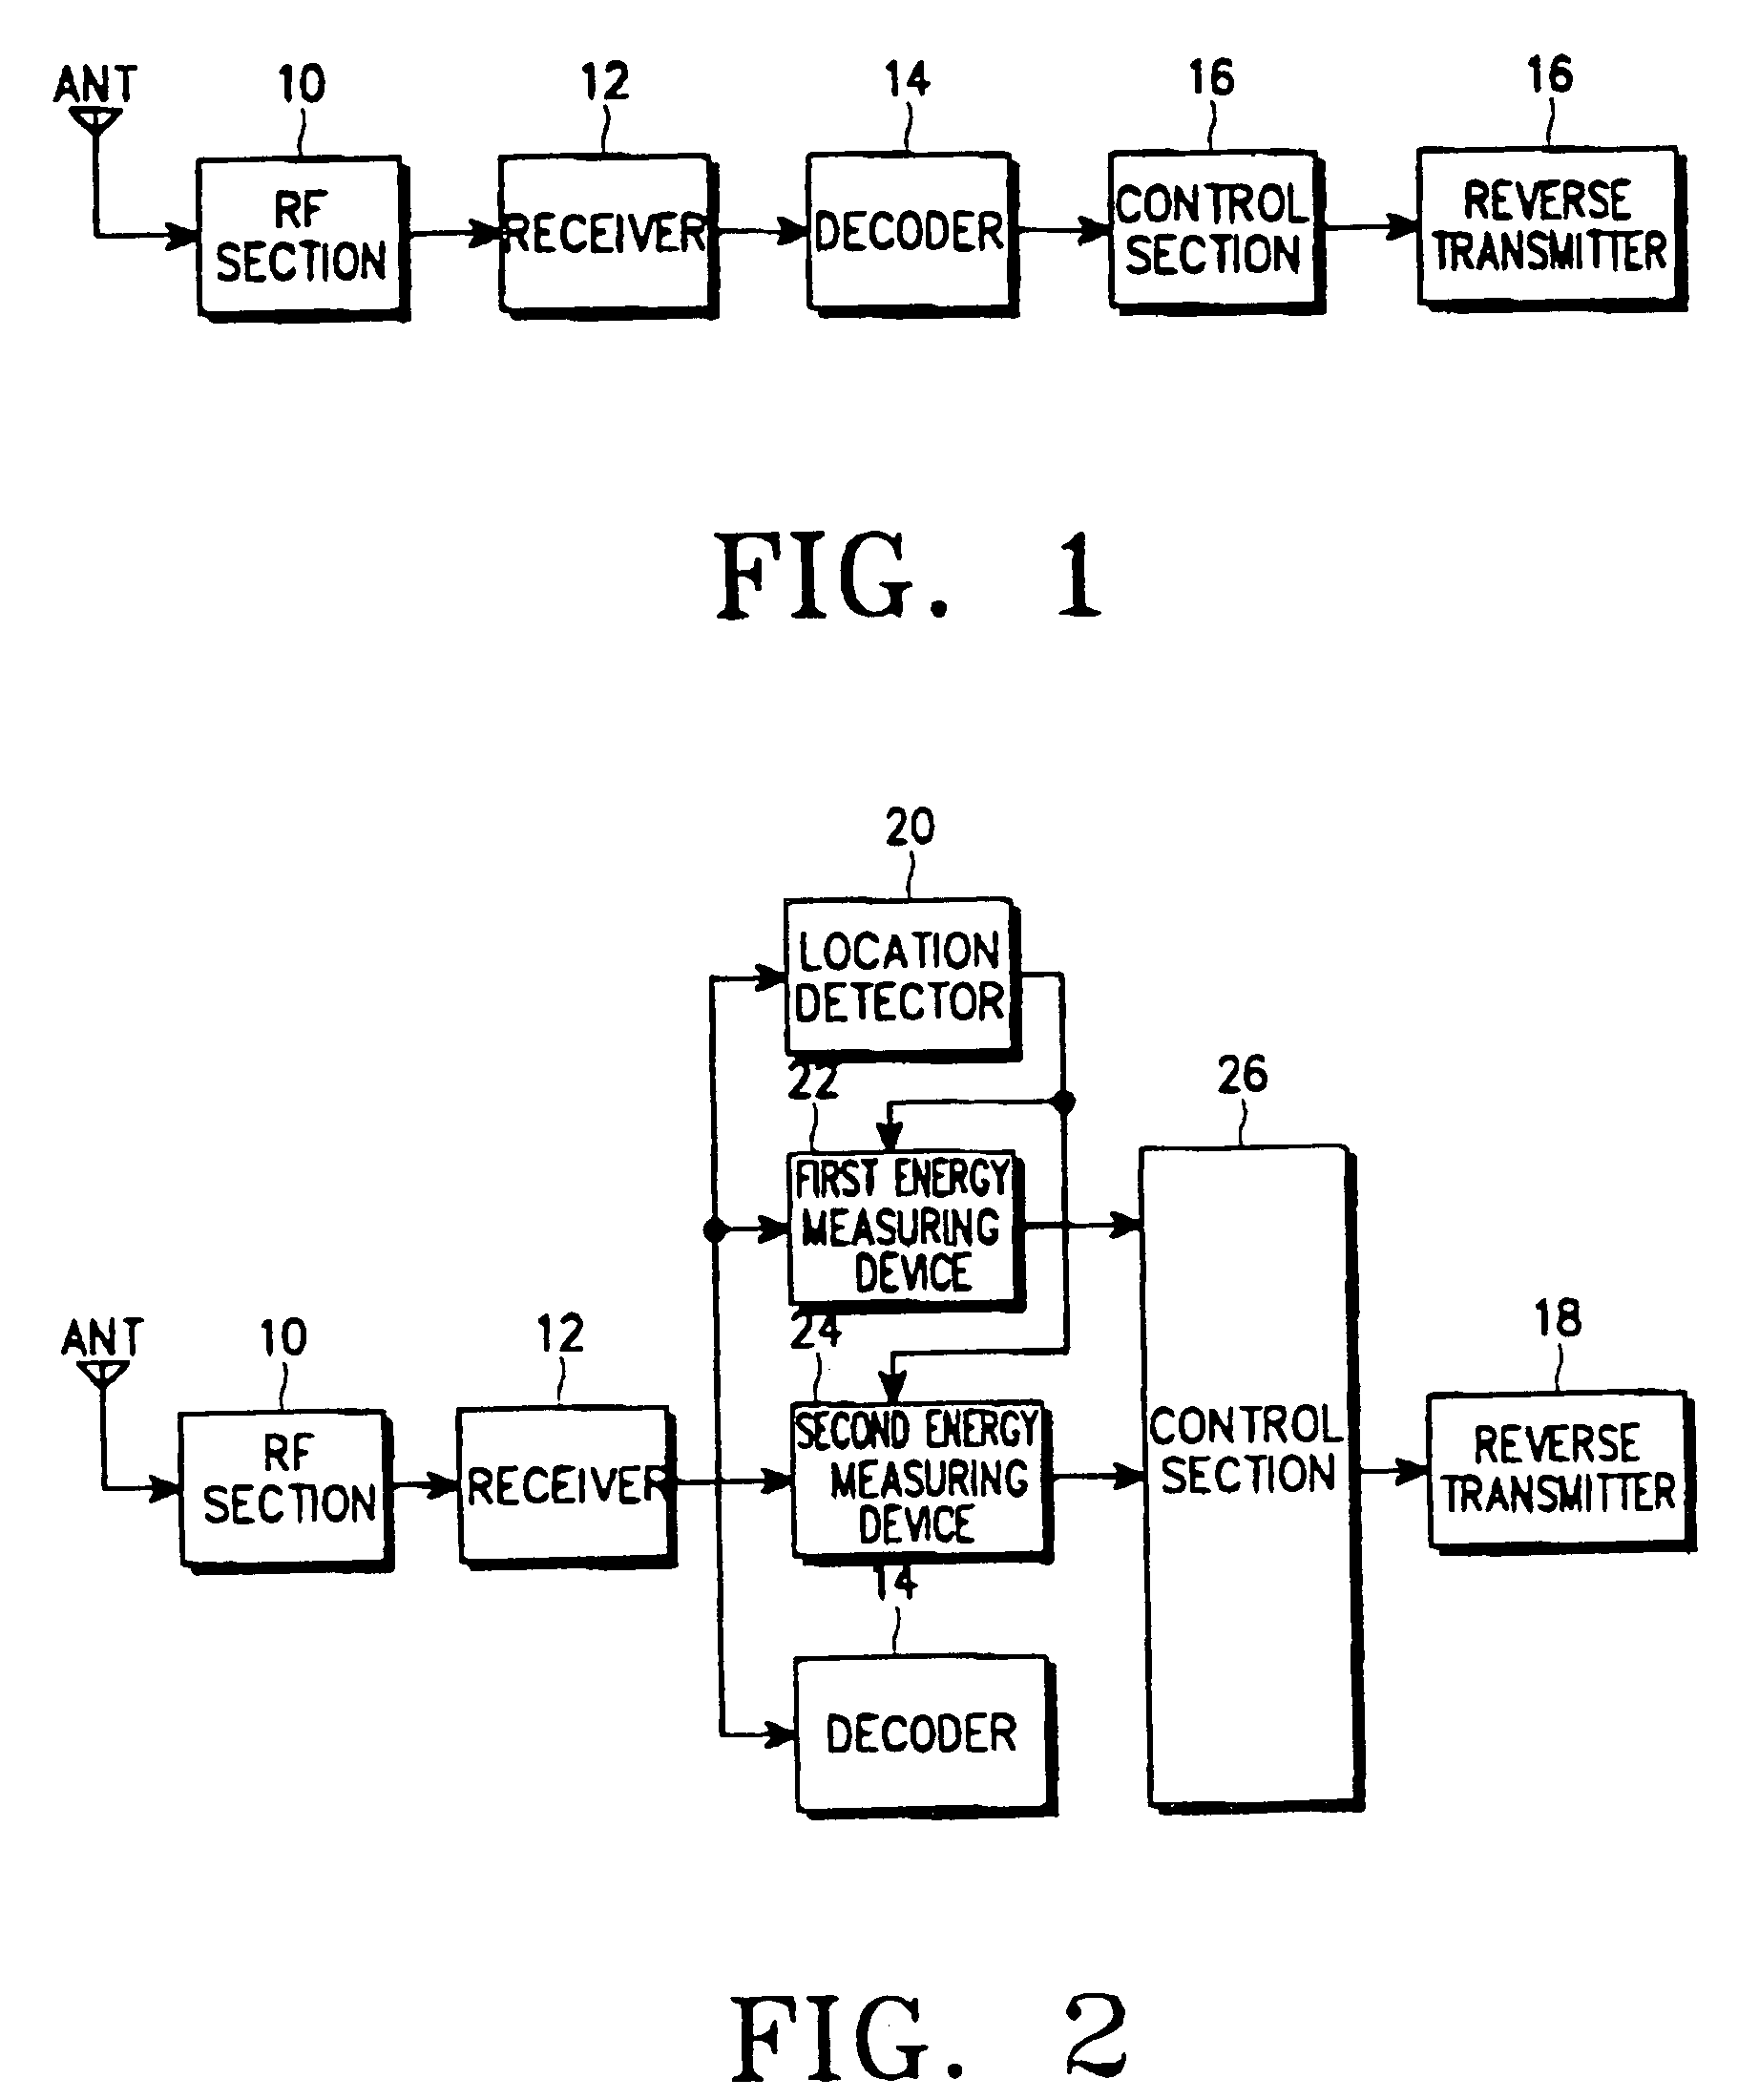 Apparatus and method of controlling forward link power when in discontinuous transmission mode in a mobile communication system